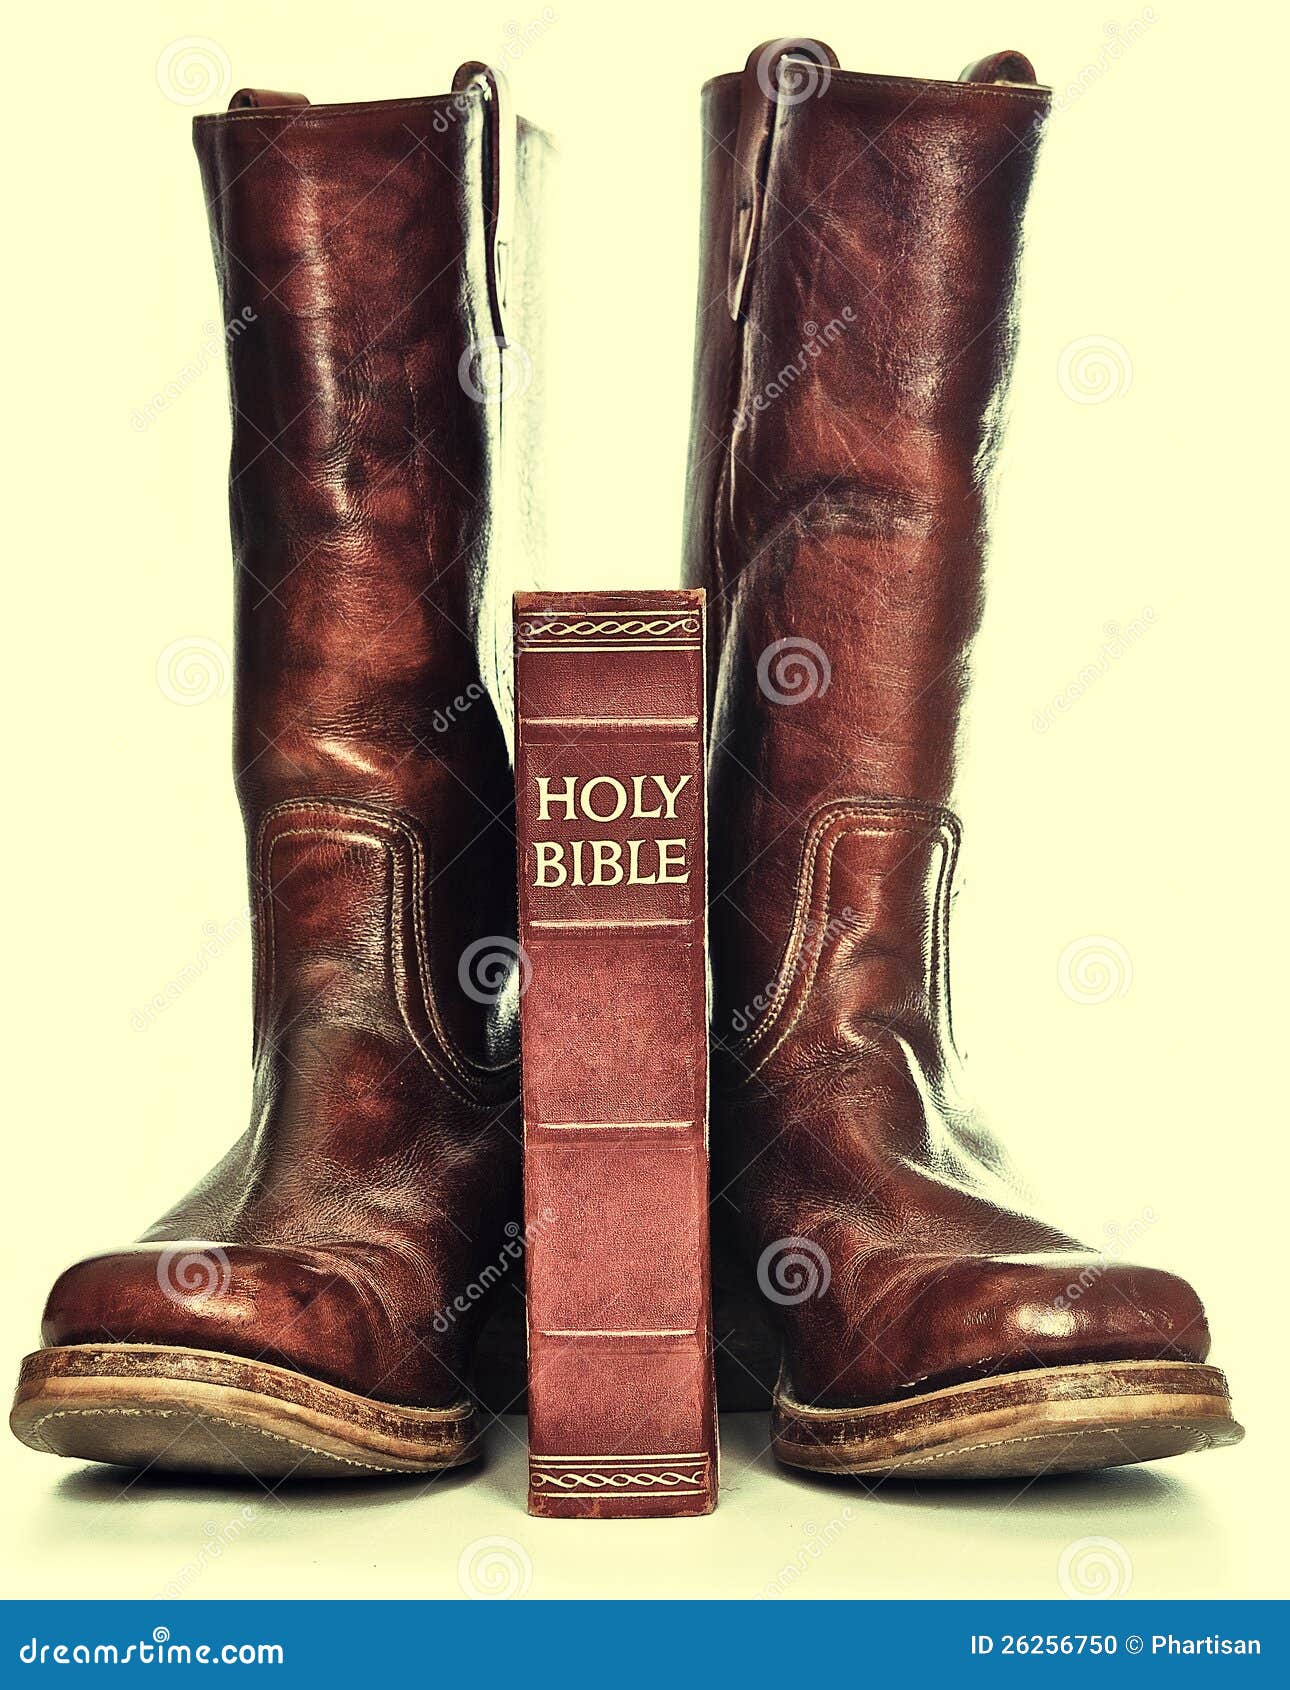 holy bible and rugged cowboy boots